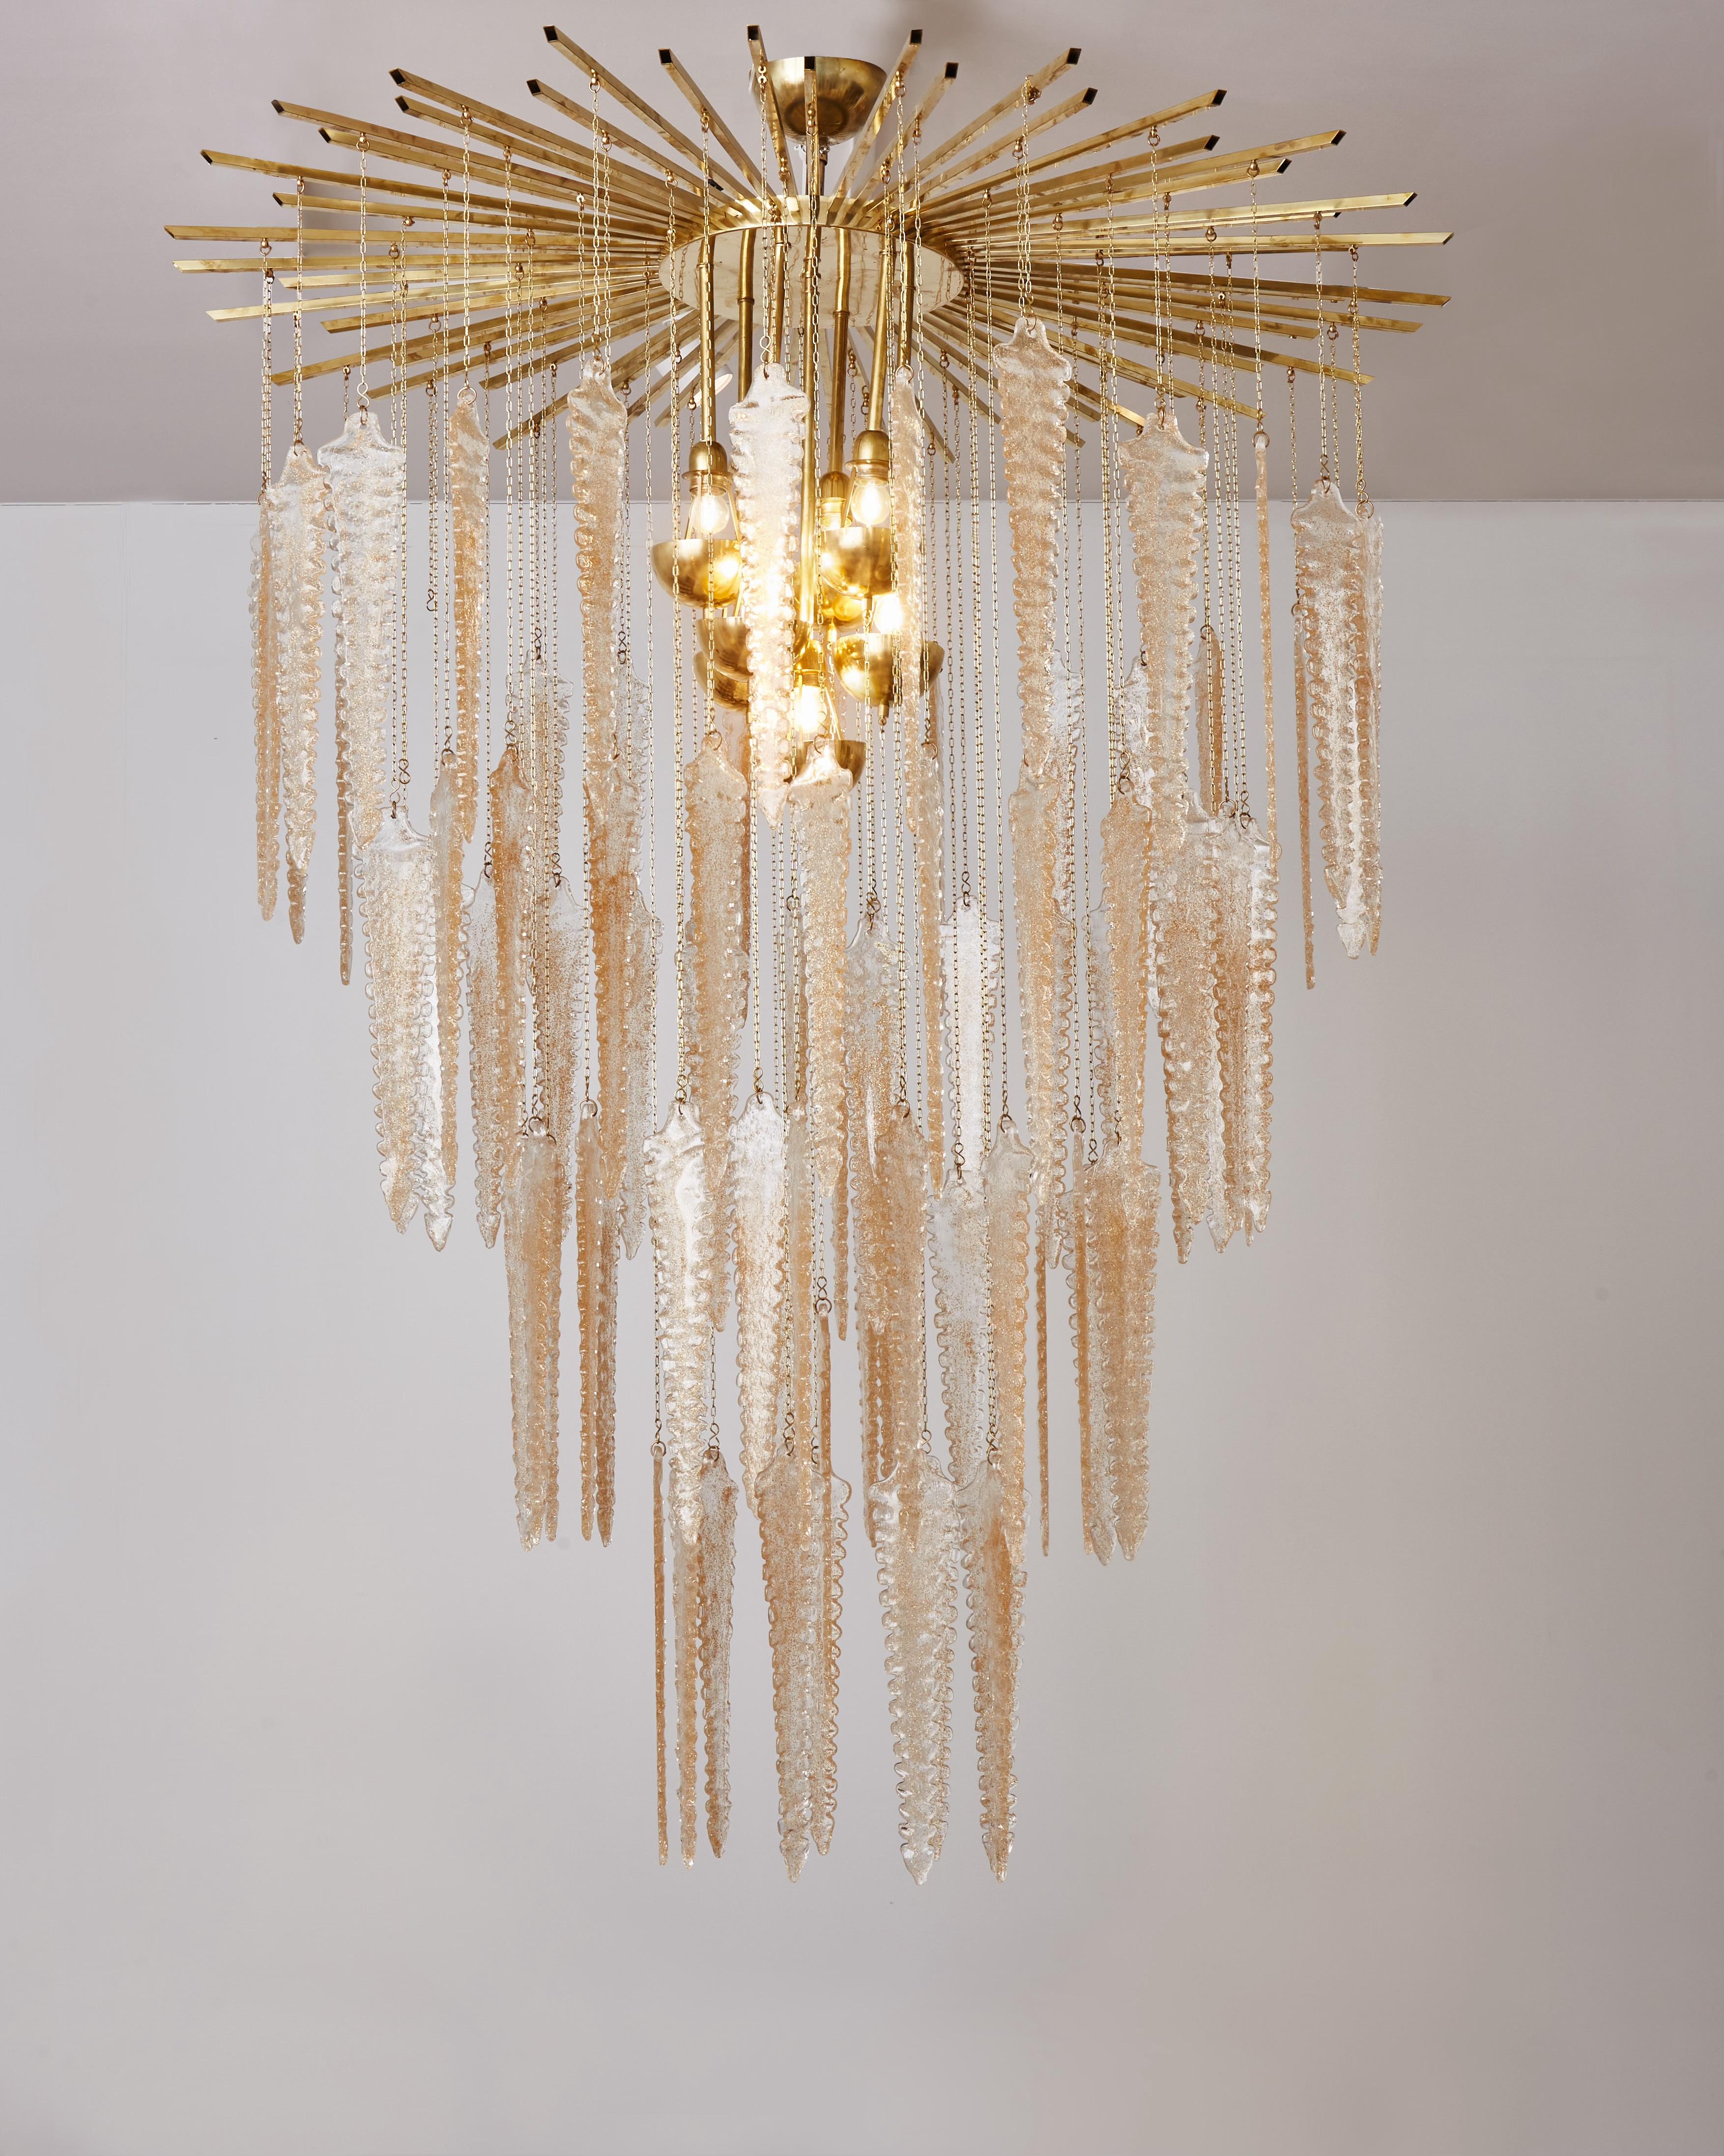 Superb chandelier in brass with hanging sculpted Murano glasses.
Creation by Studio Glustin.